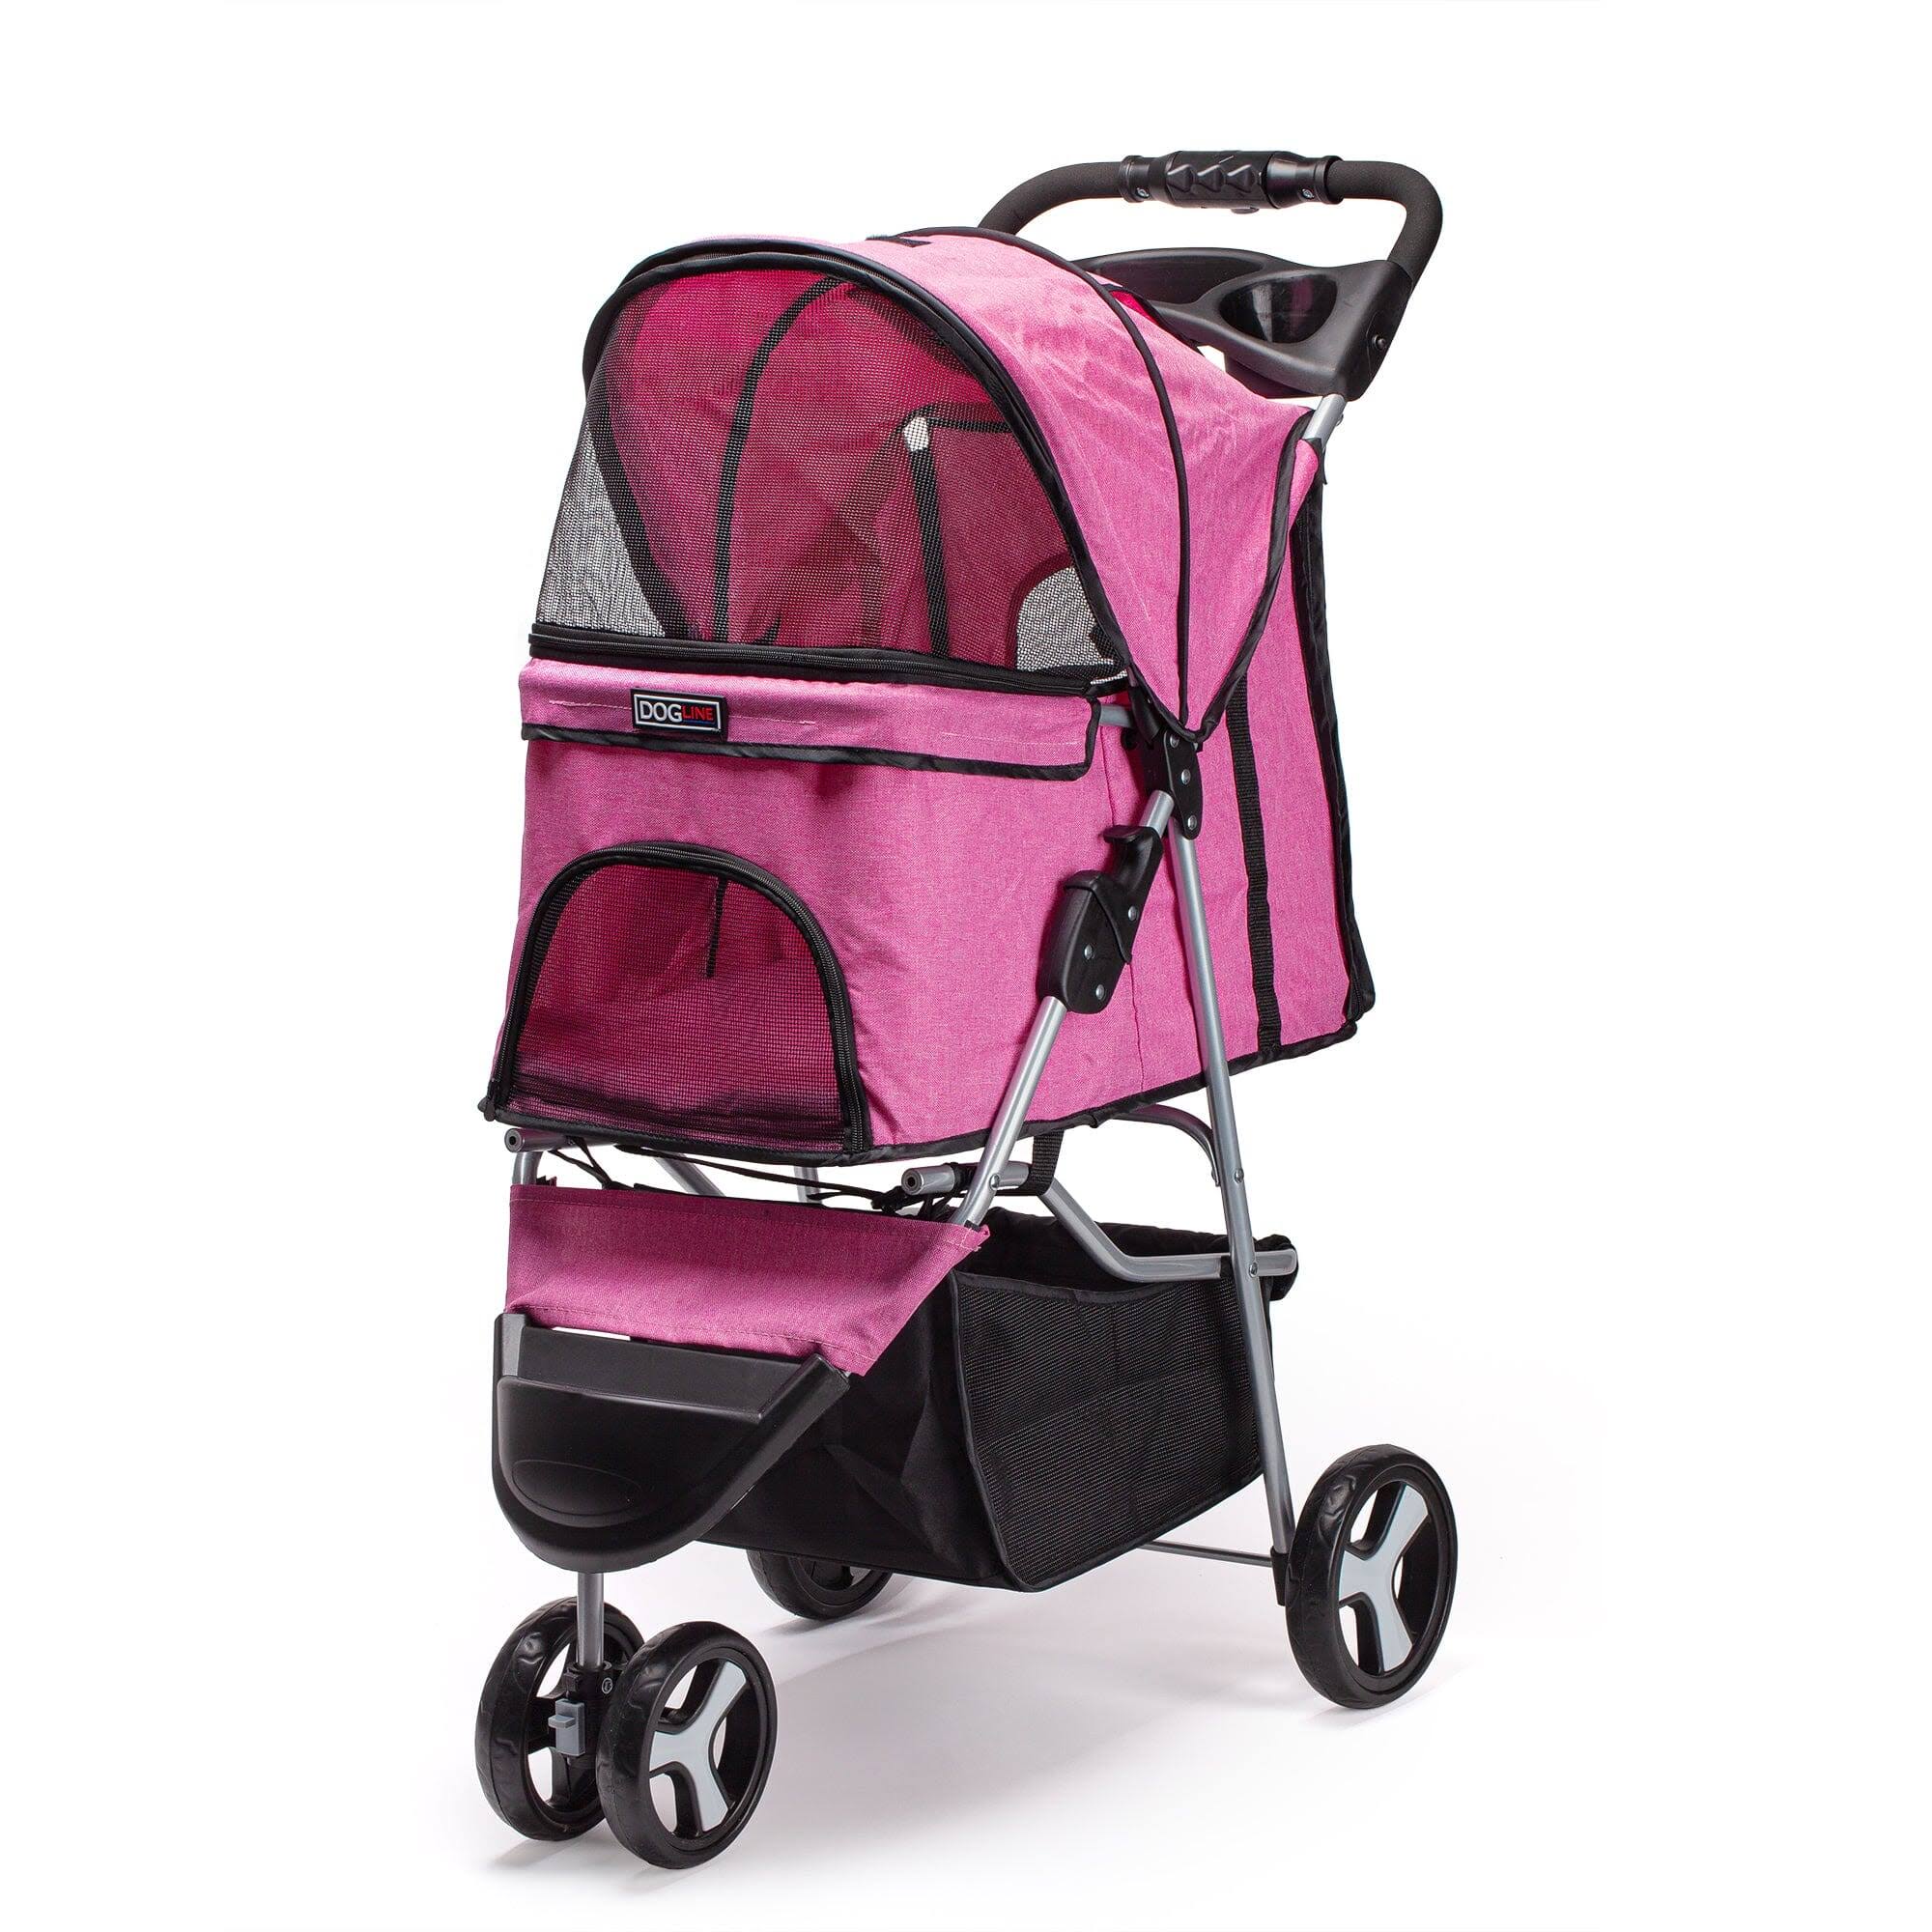 Dogline Dtc-803-7 Casual Pet Stroller + Removable Cup Holder - Pink